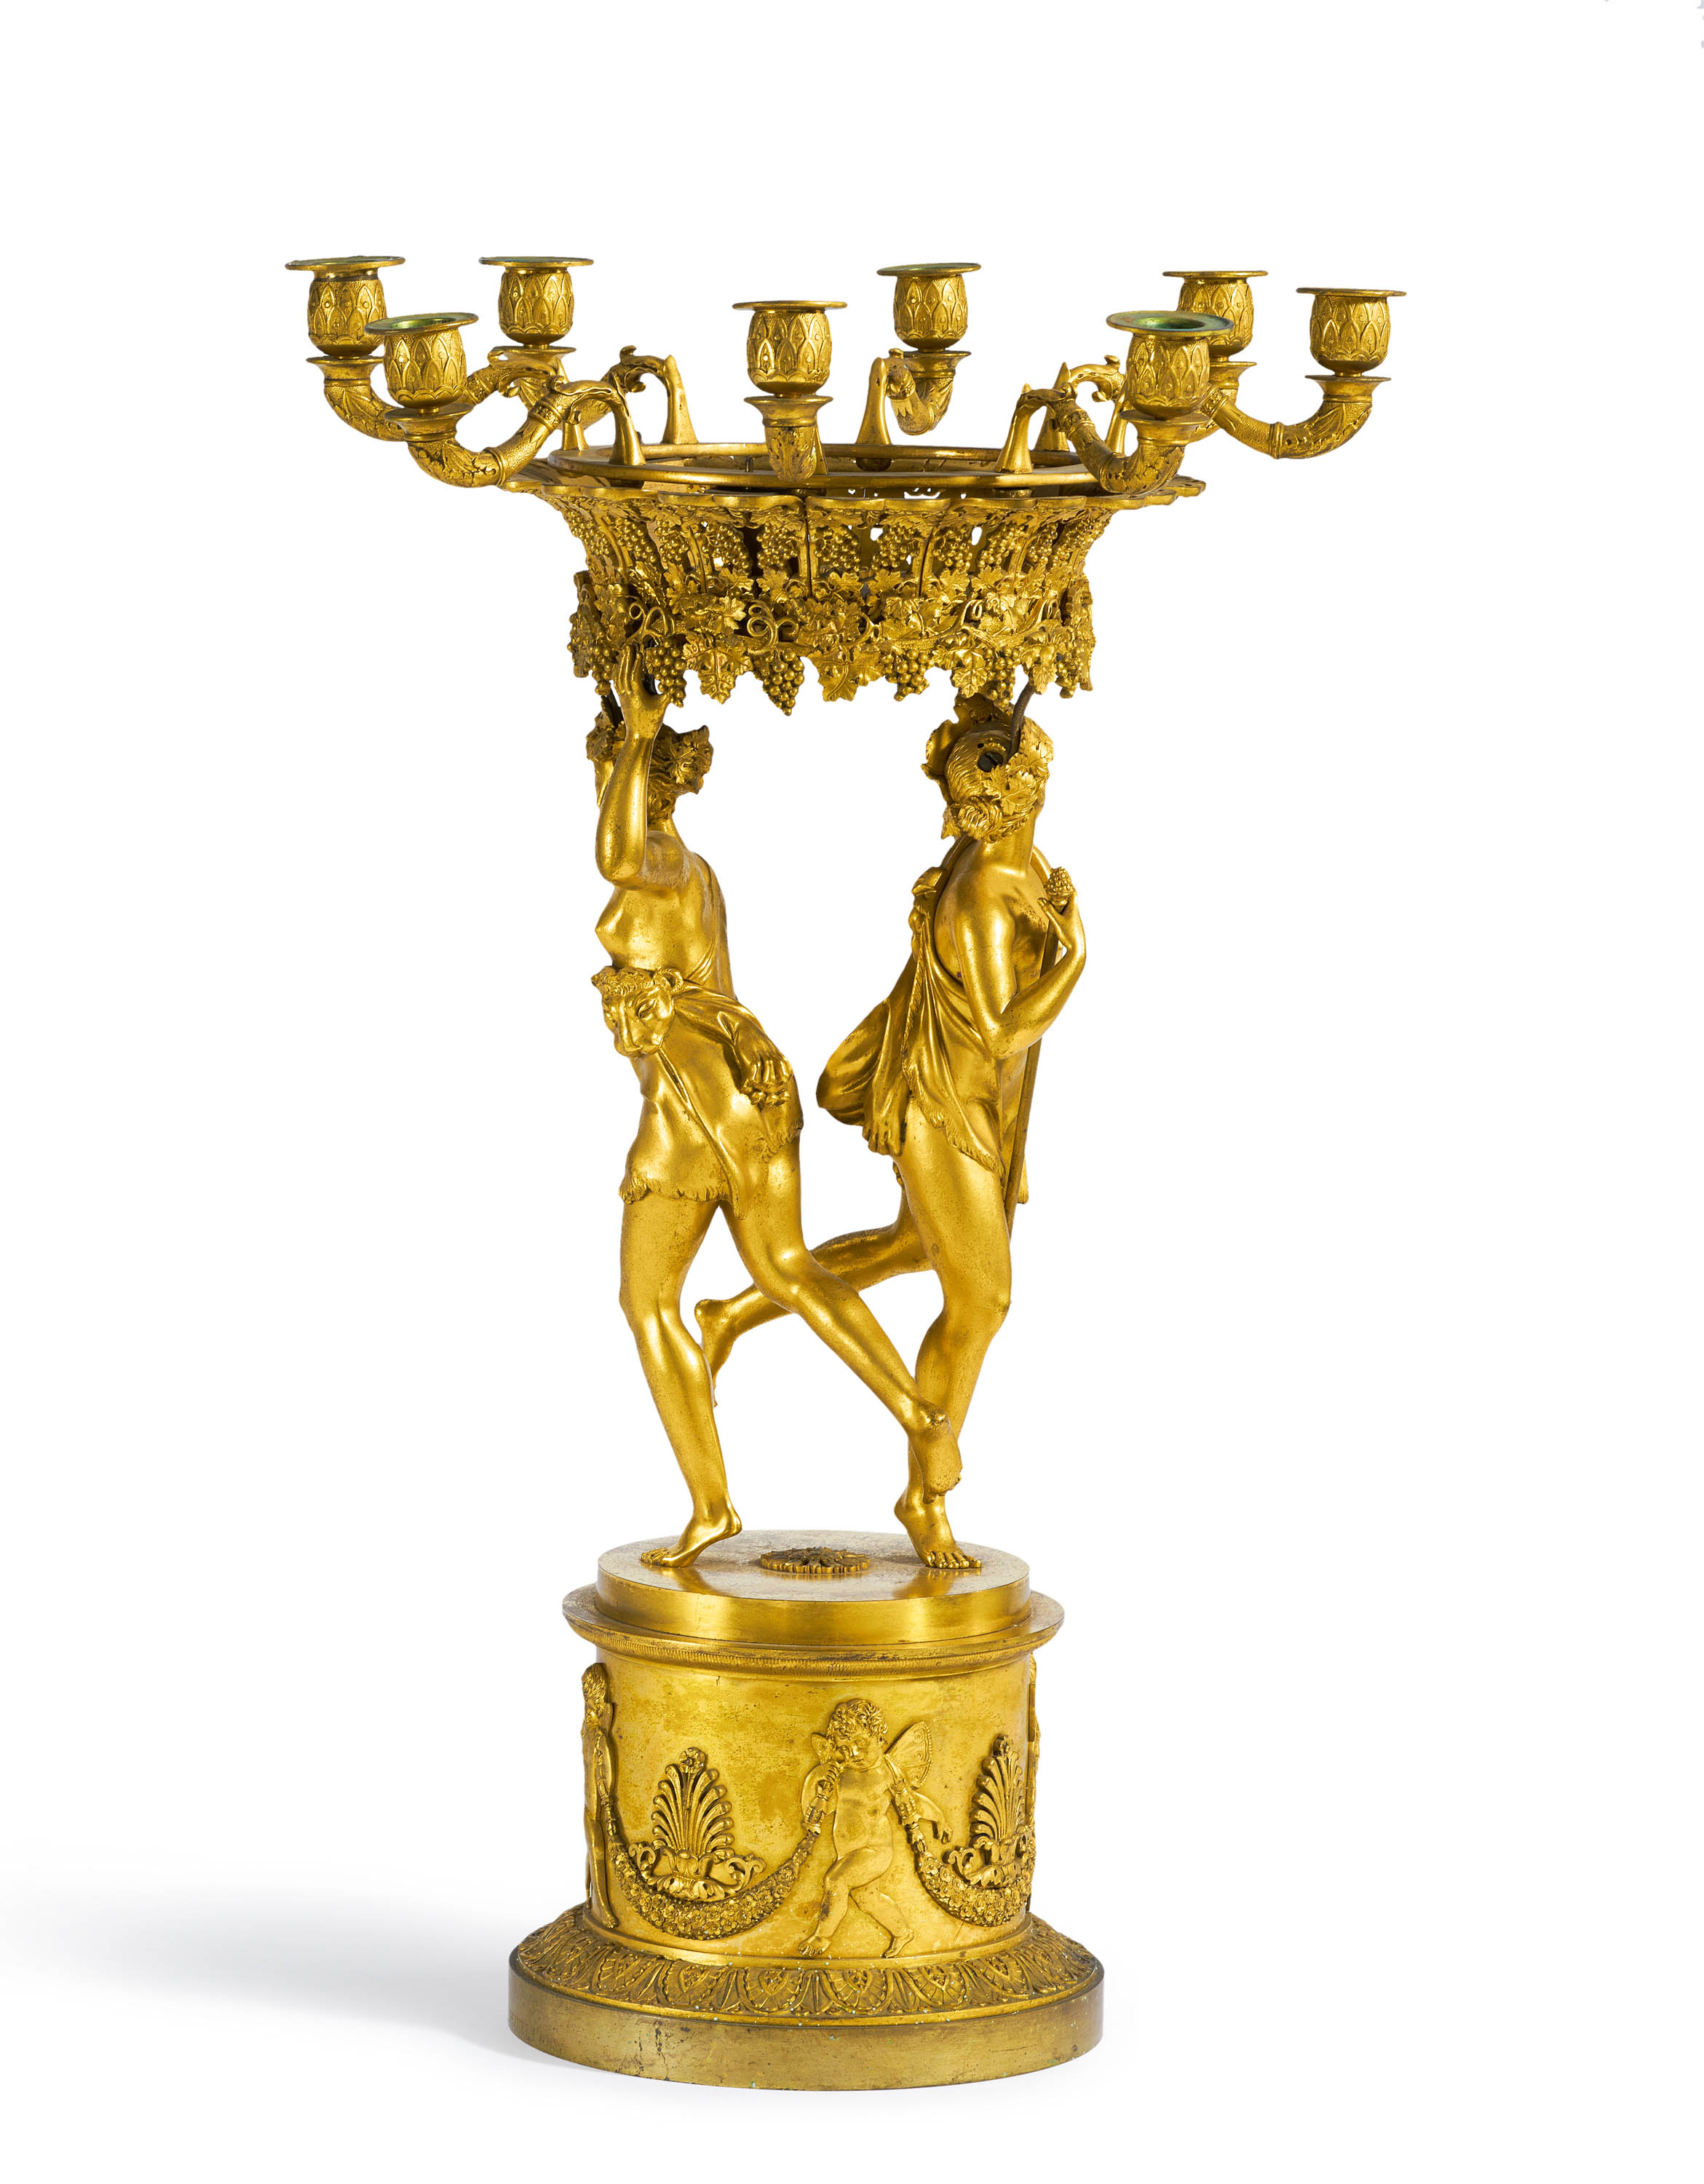 Large Empire centerpiece with Bacchus & Ceres - Image 4 of 4